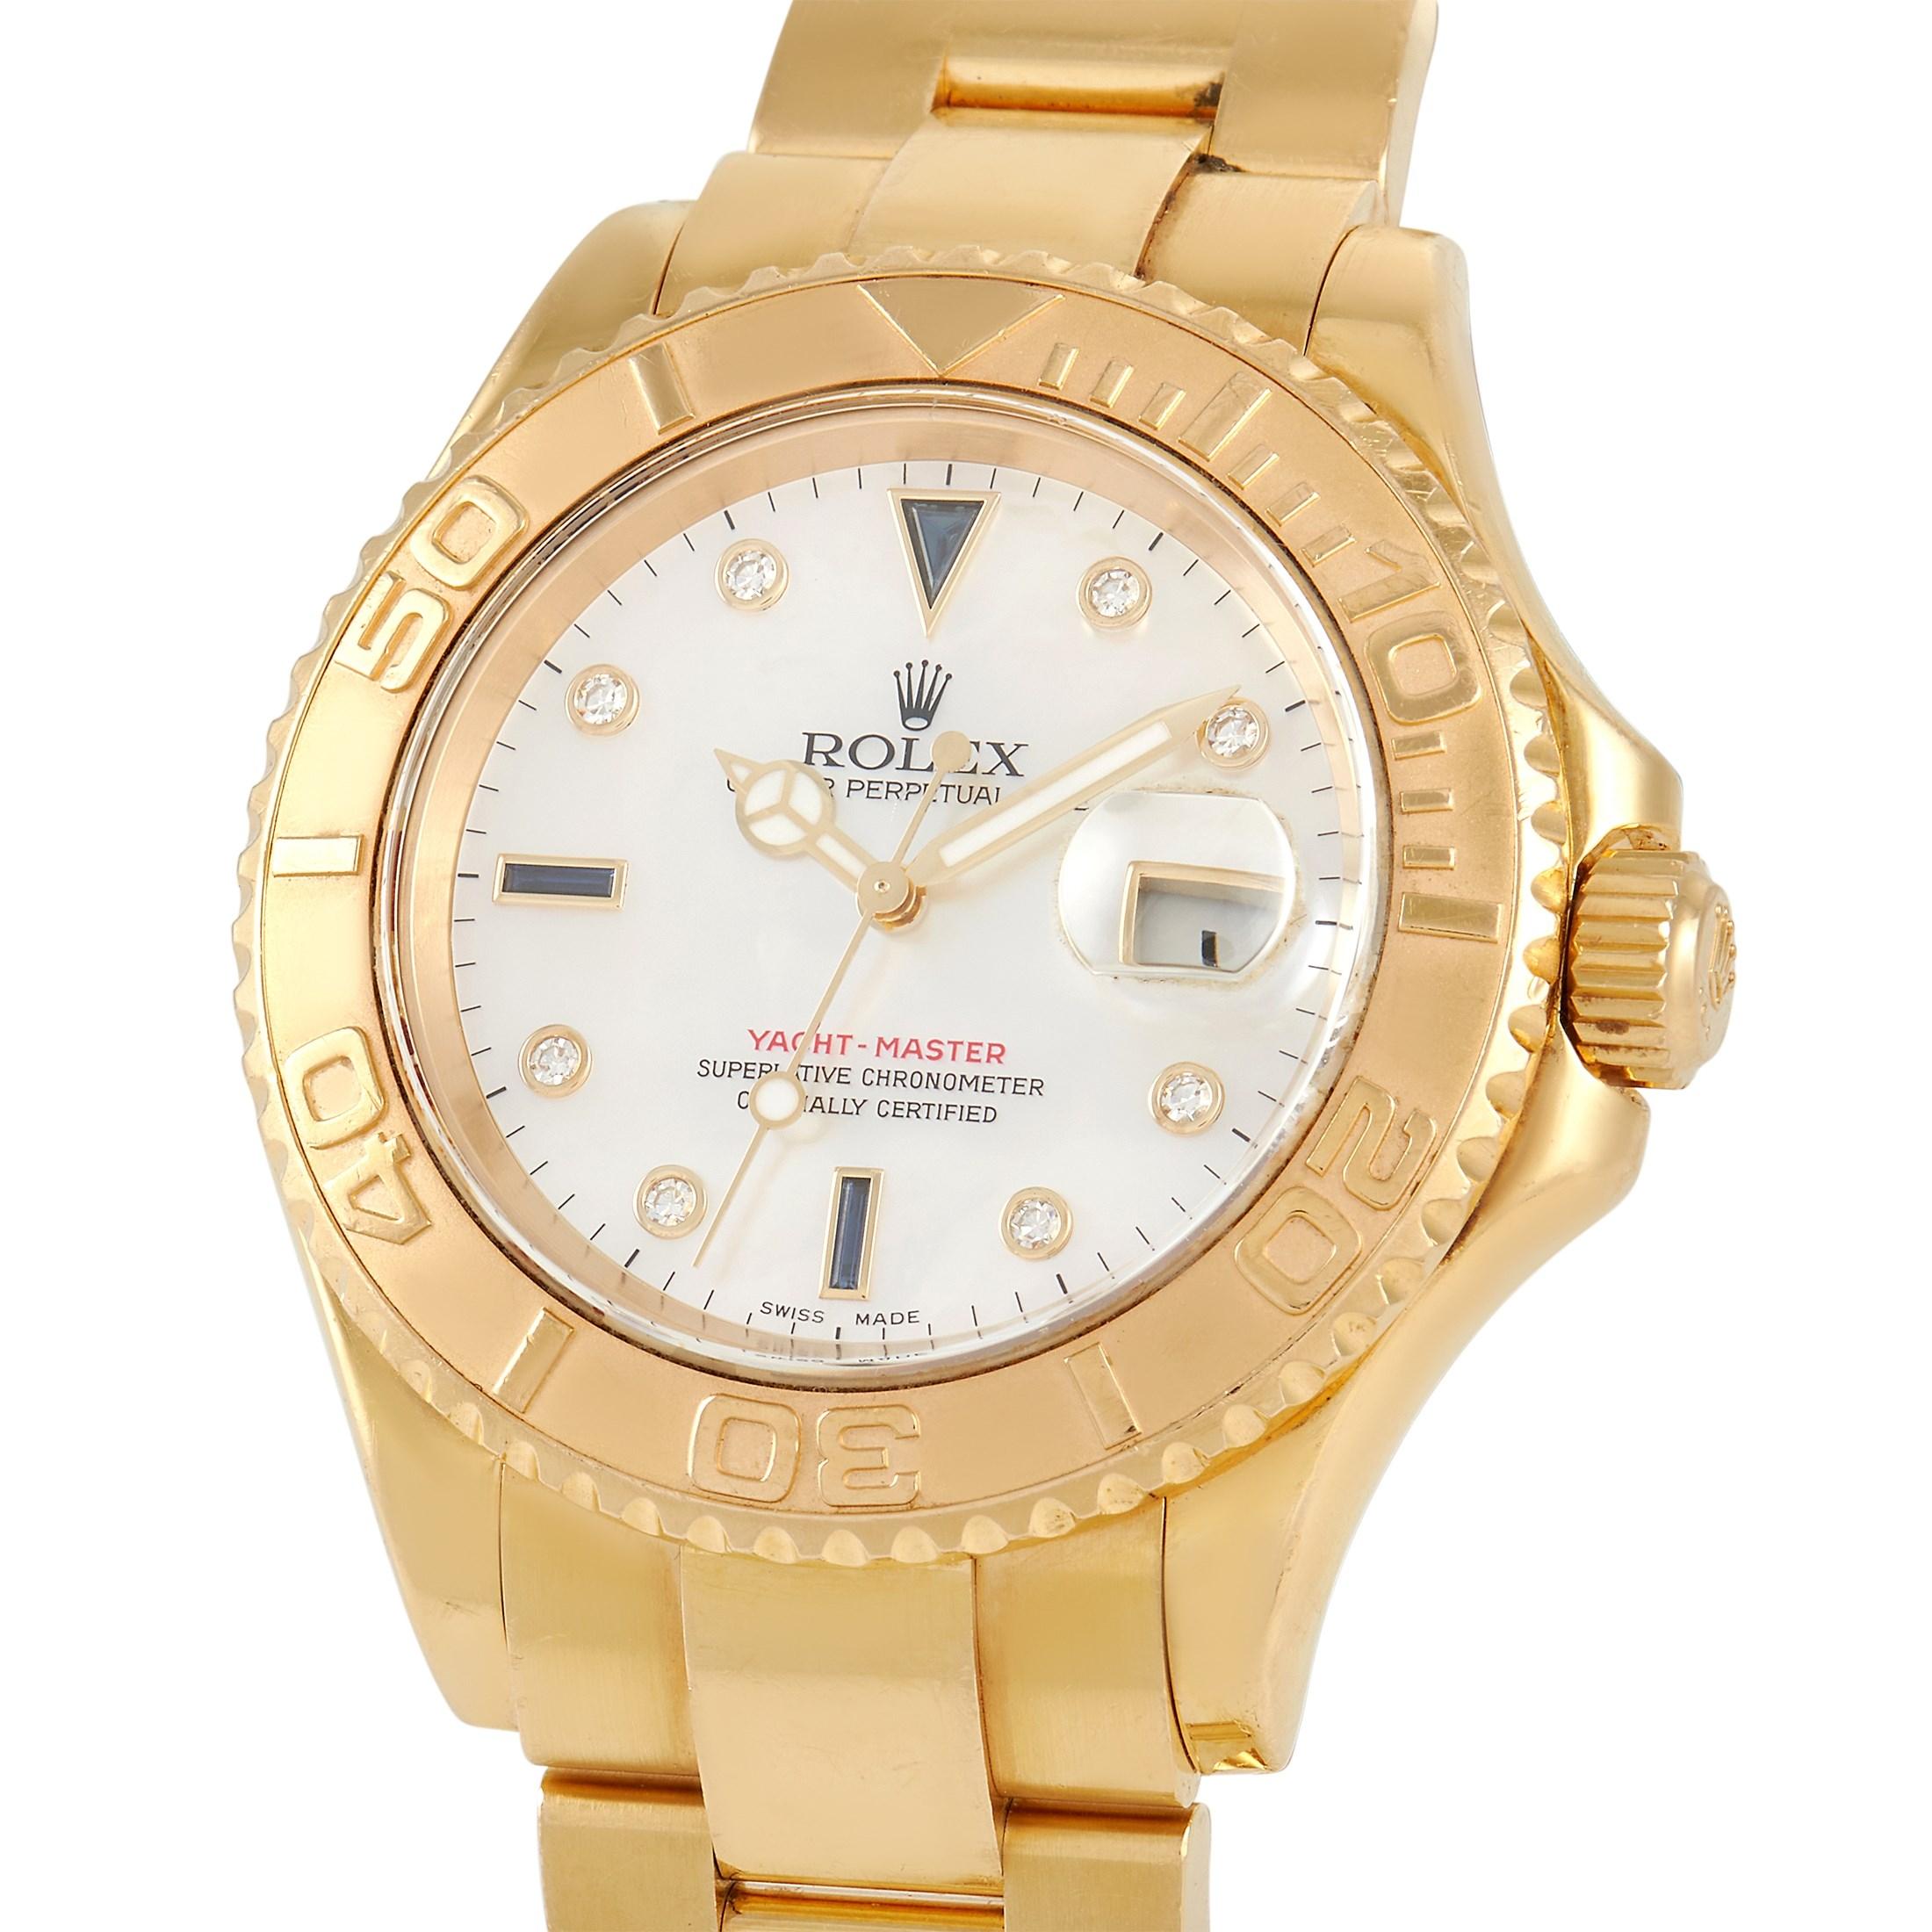 The perfect watch for sailing, the Rolex Yacht Master 18K Yellow Gold Mother of Pearl Watch 16628 is designed with a 60-minute rotatable bezel, water-resistance to 100 meters, and a reliable perpetual movement. The 40mm case is fashioned from solid